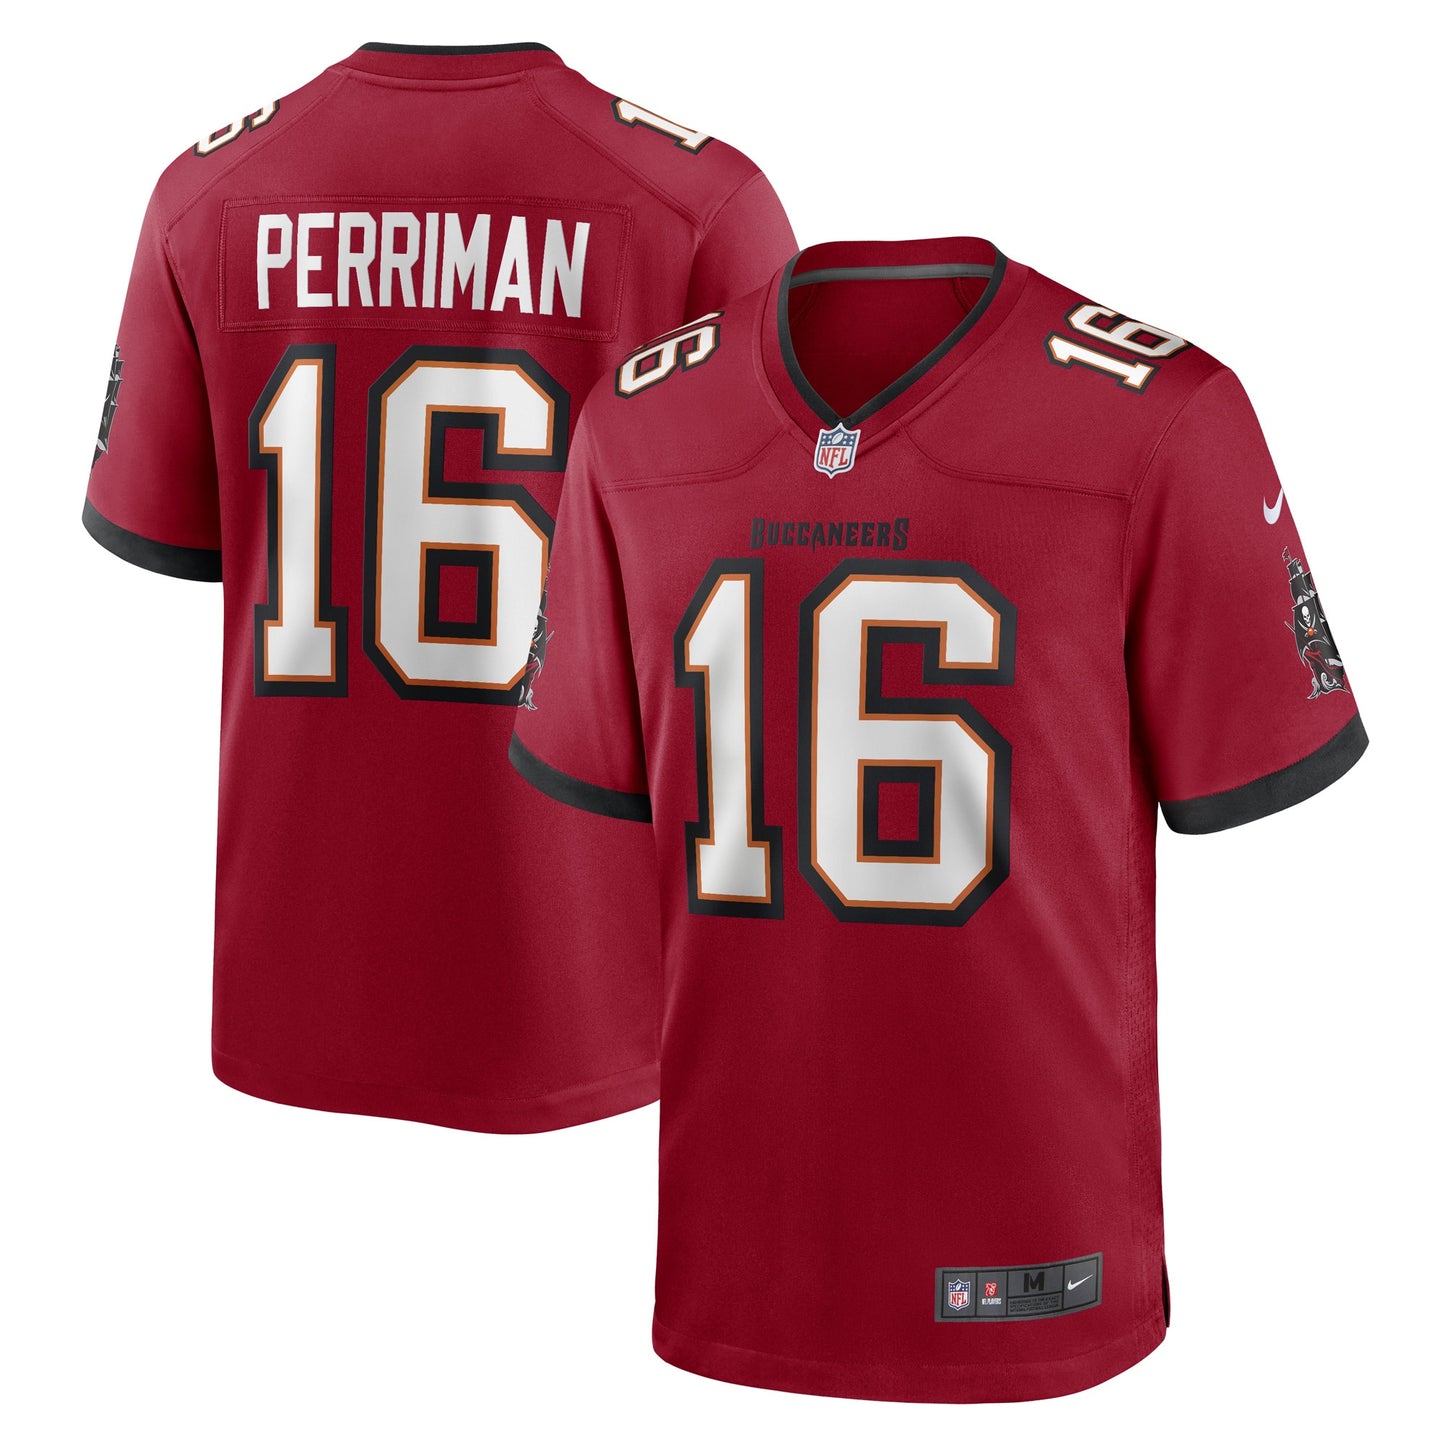 Breshad Perriman Tampa Bay Buccaneers Nike Game Player Jersey - Red